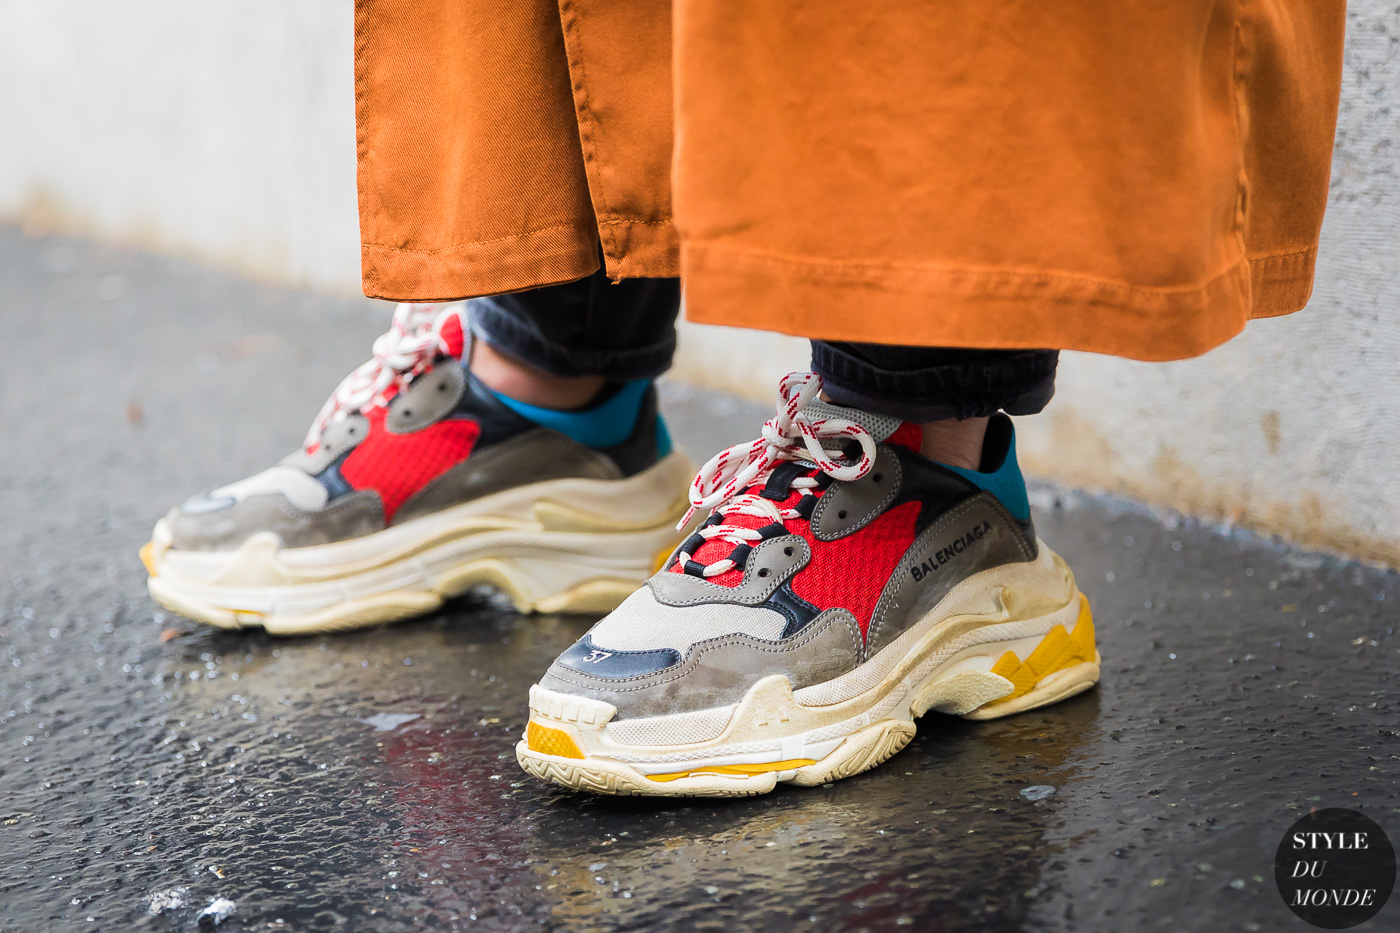 Balenciaga sneakers by STYLEDUMONDE Street Style Fashion Photography_48A8125